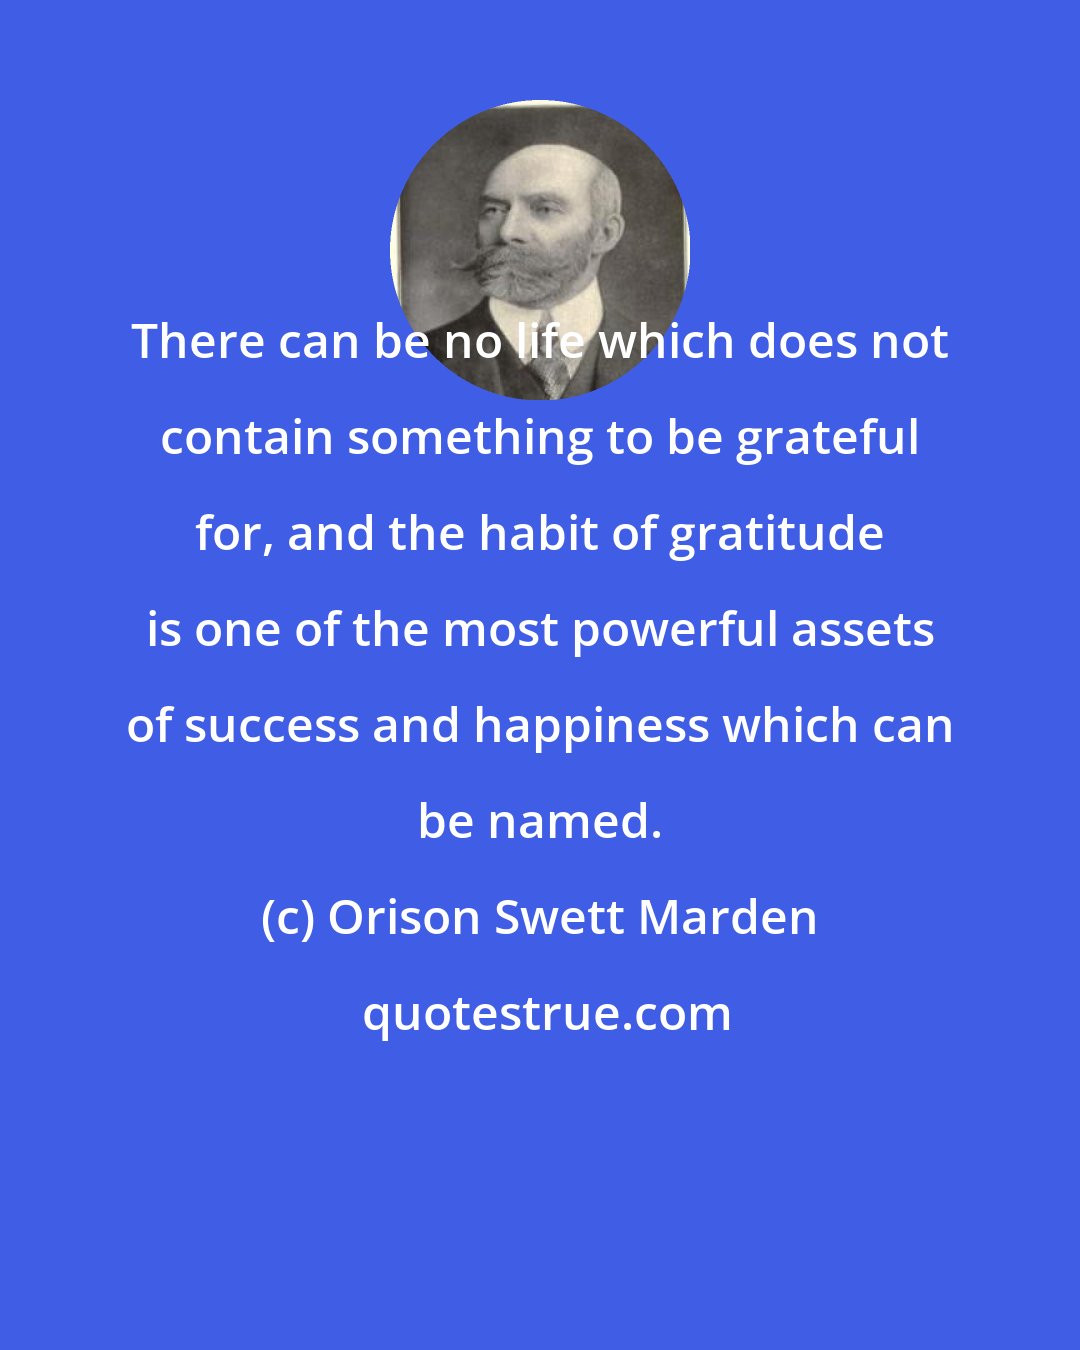 Orison Swett Marden: There can be no life which does not contain something to be grateful for, and the habit of gratitude is one of the most powerful assets of success and happiness which can be named.